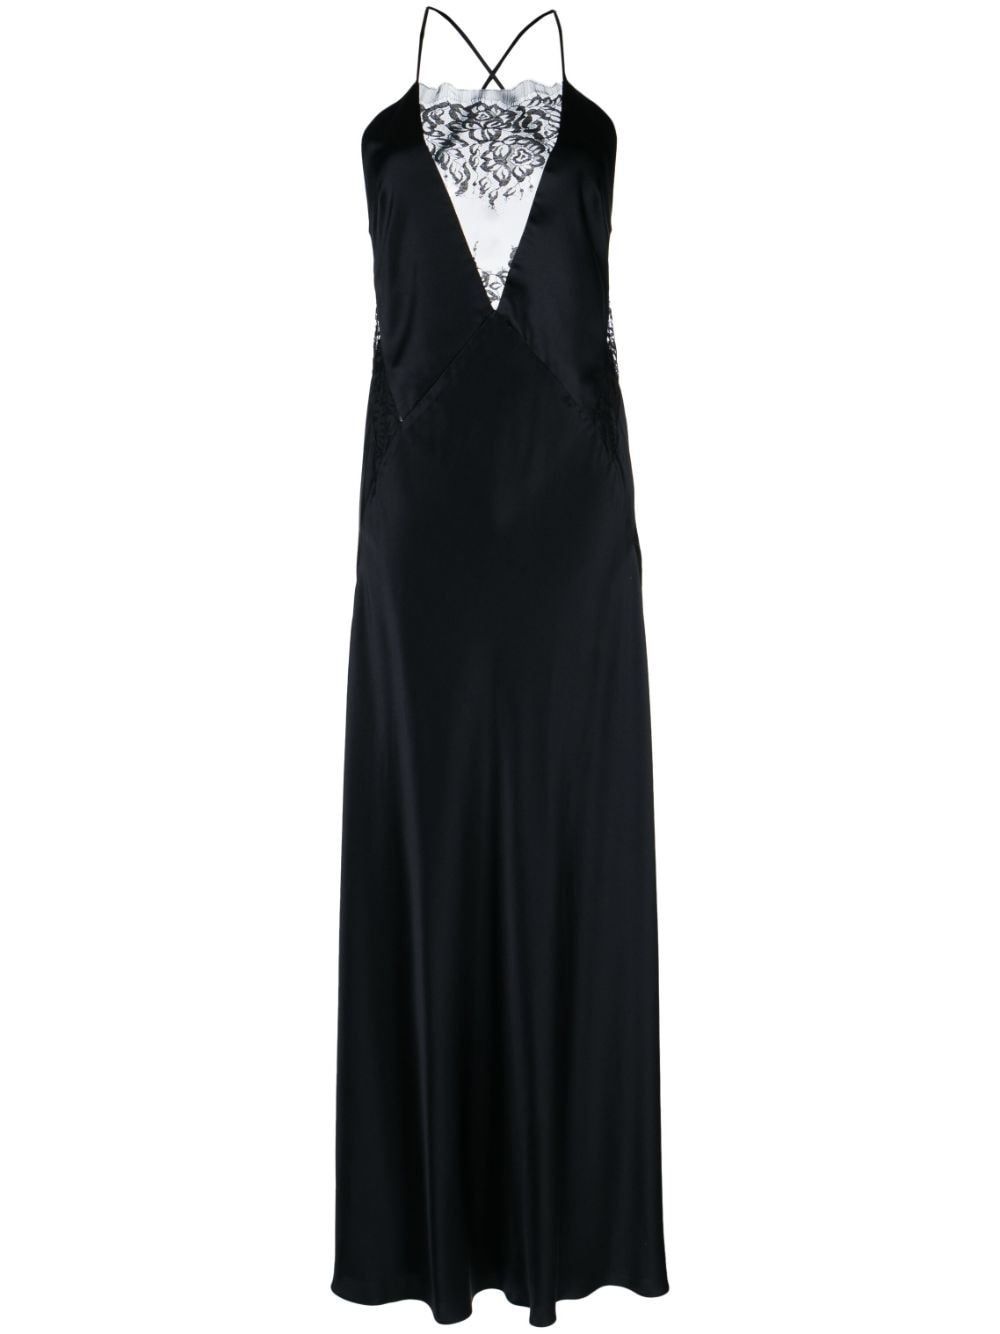 Image 1 of Michelle Mason lace-inset gown long sleeveless dress